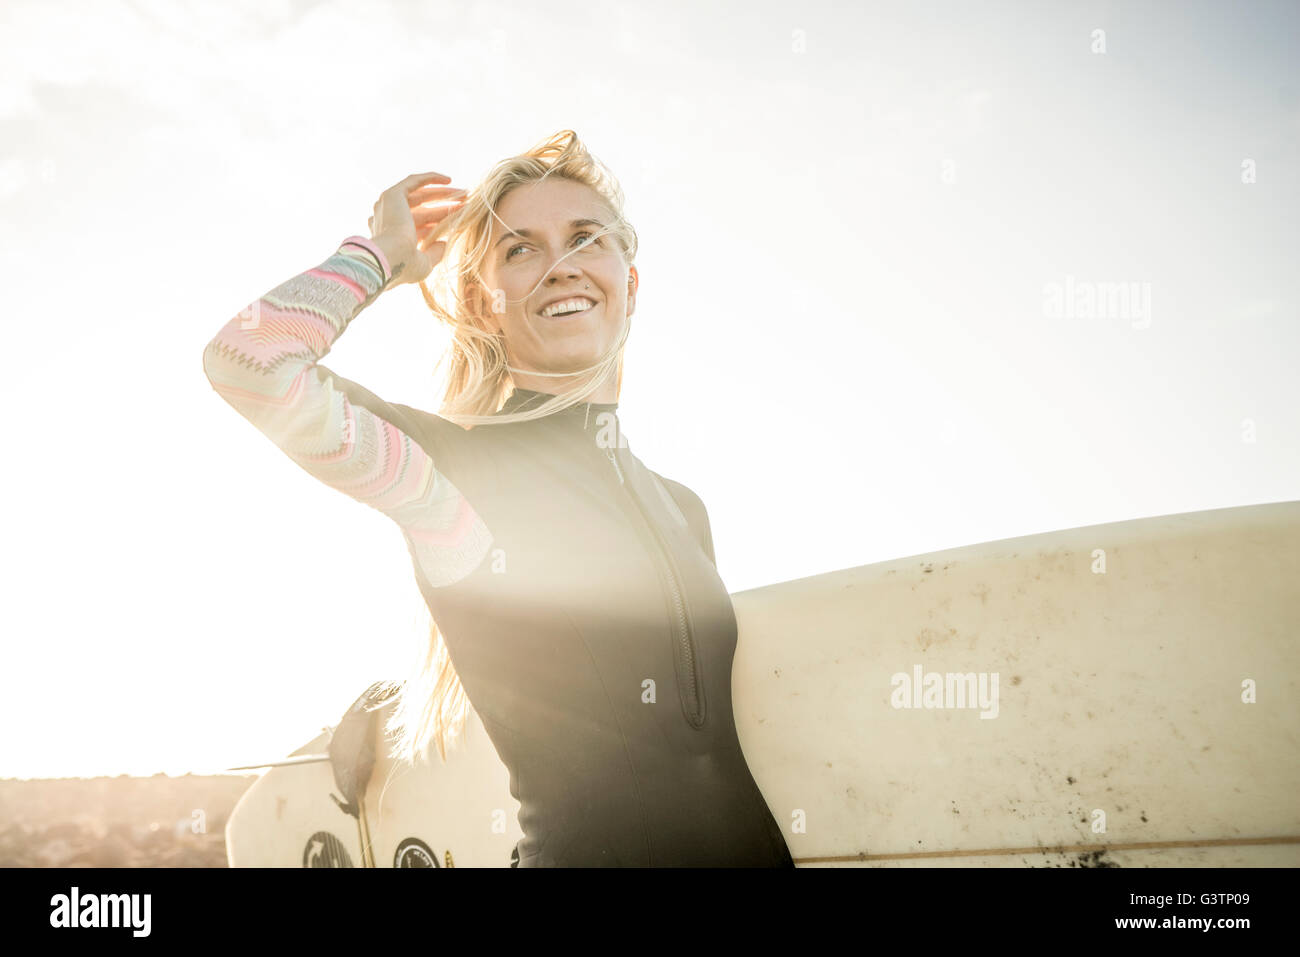 A woman in a wetsuit preparing to surf at Corralejo in Fuerteventura. Stock Photo